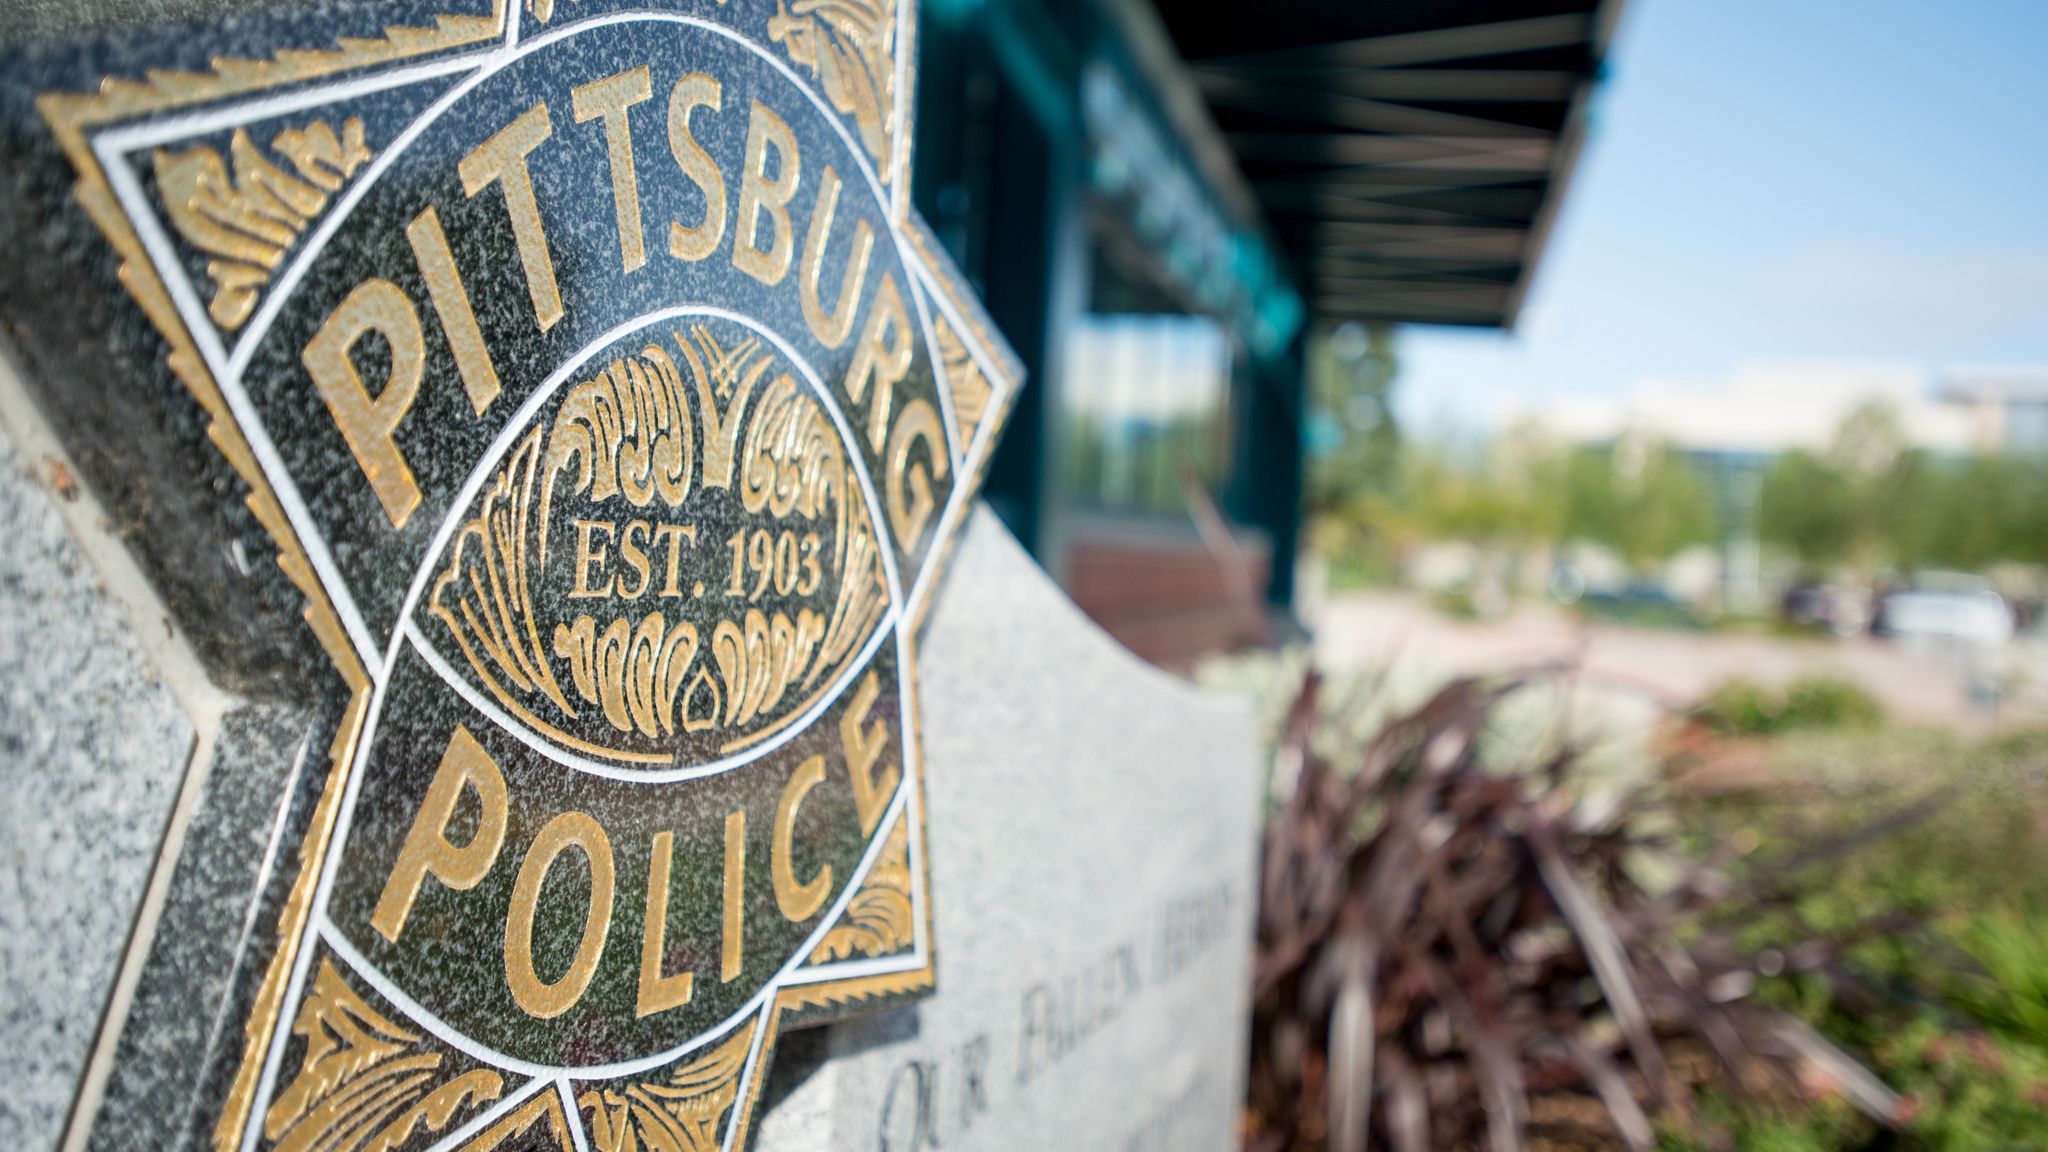 Pittsburg Police Department